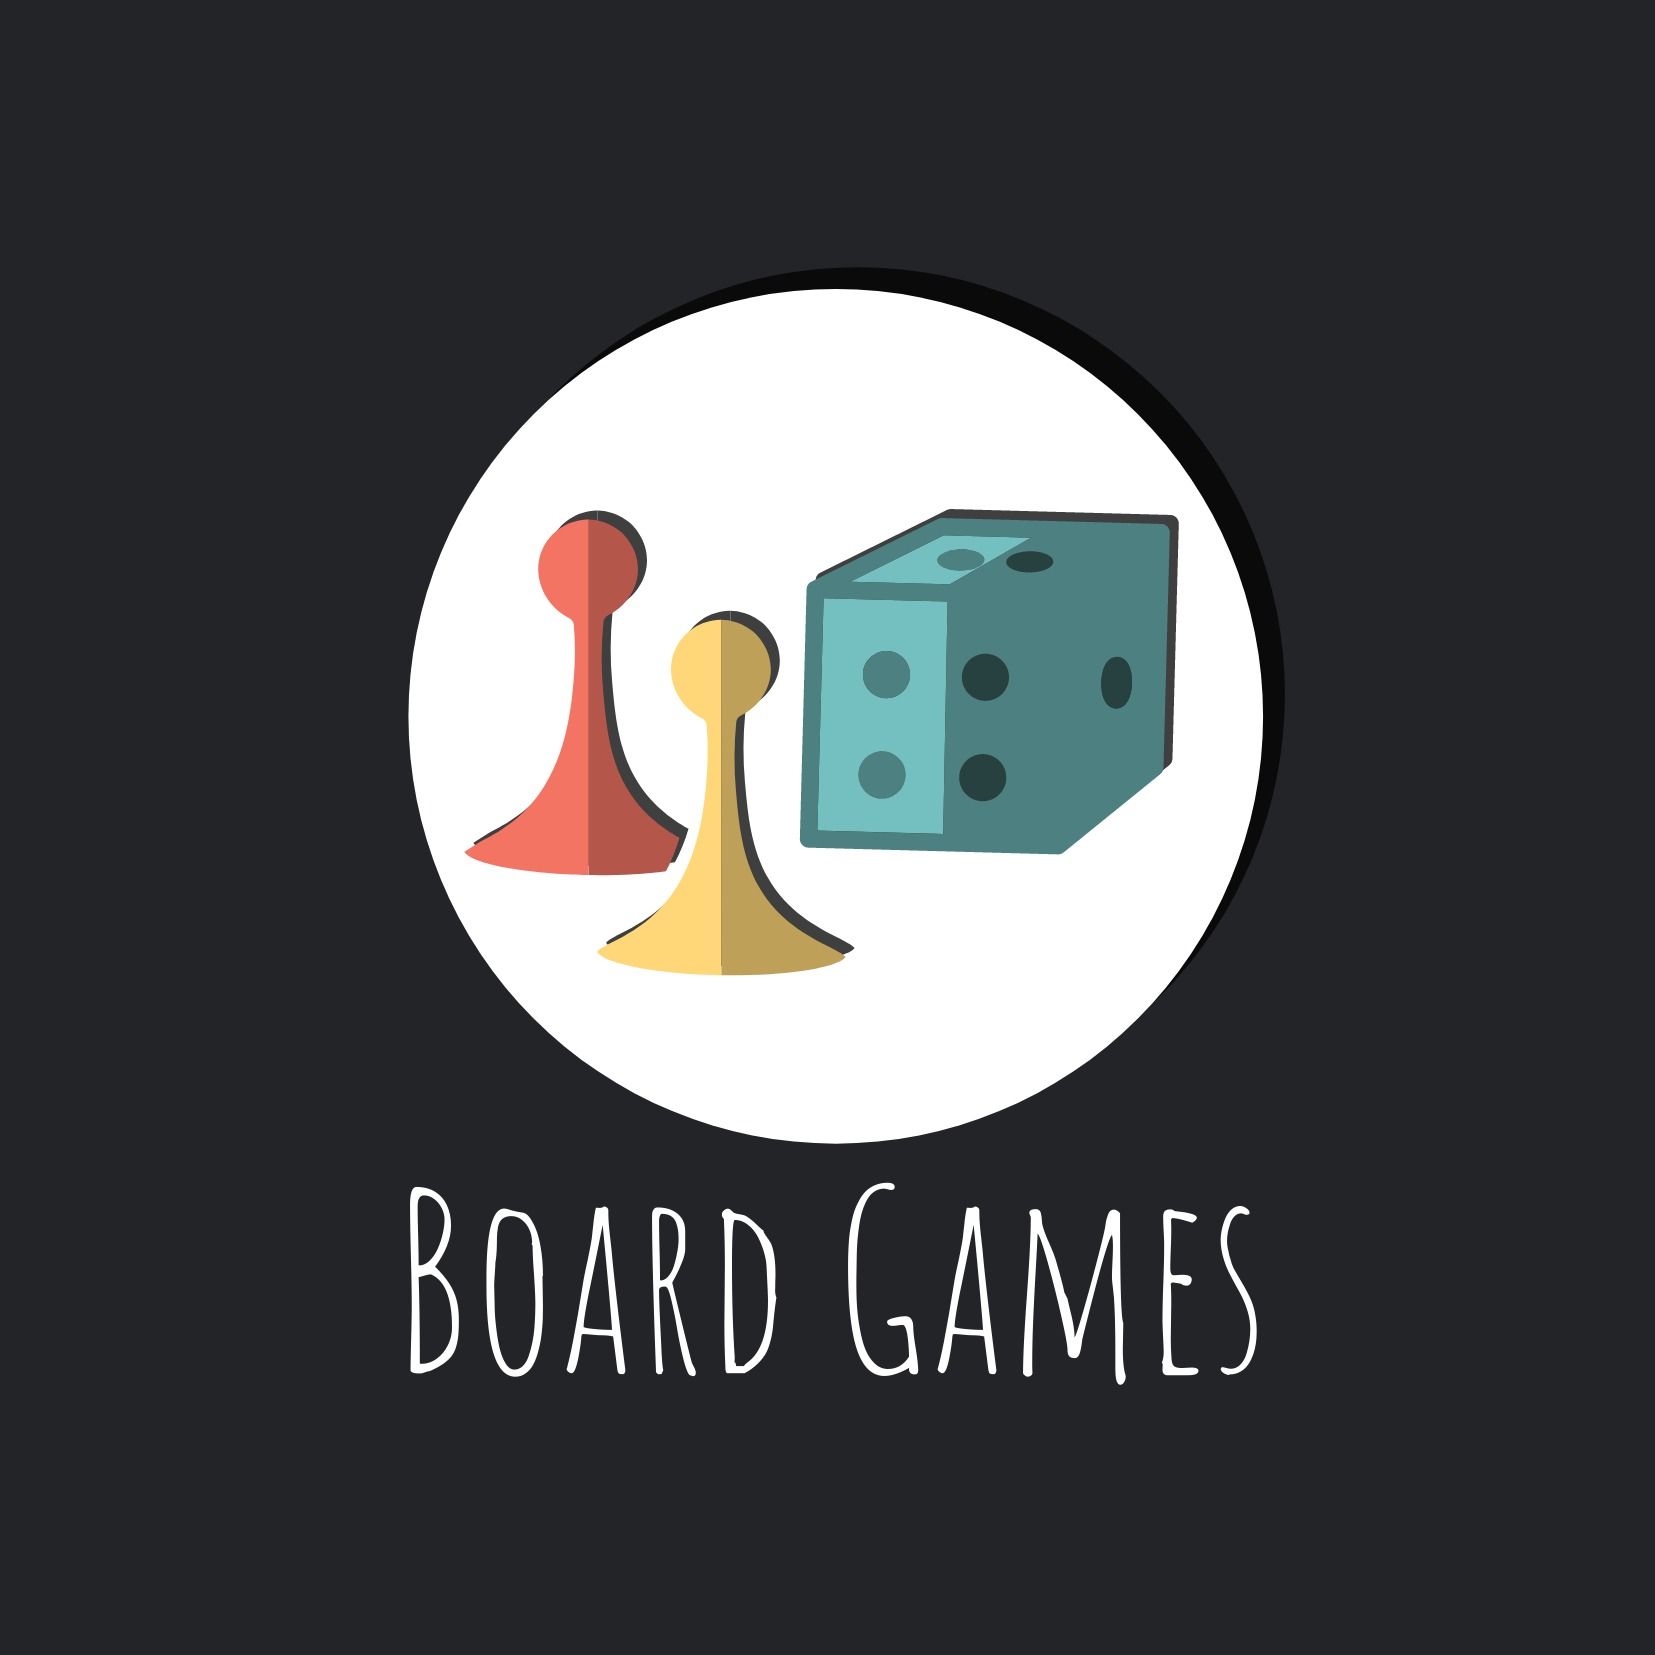 Board games logo featuring two pawns and a dice - One of the best font options for gaming logos - Image